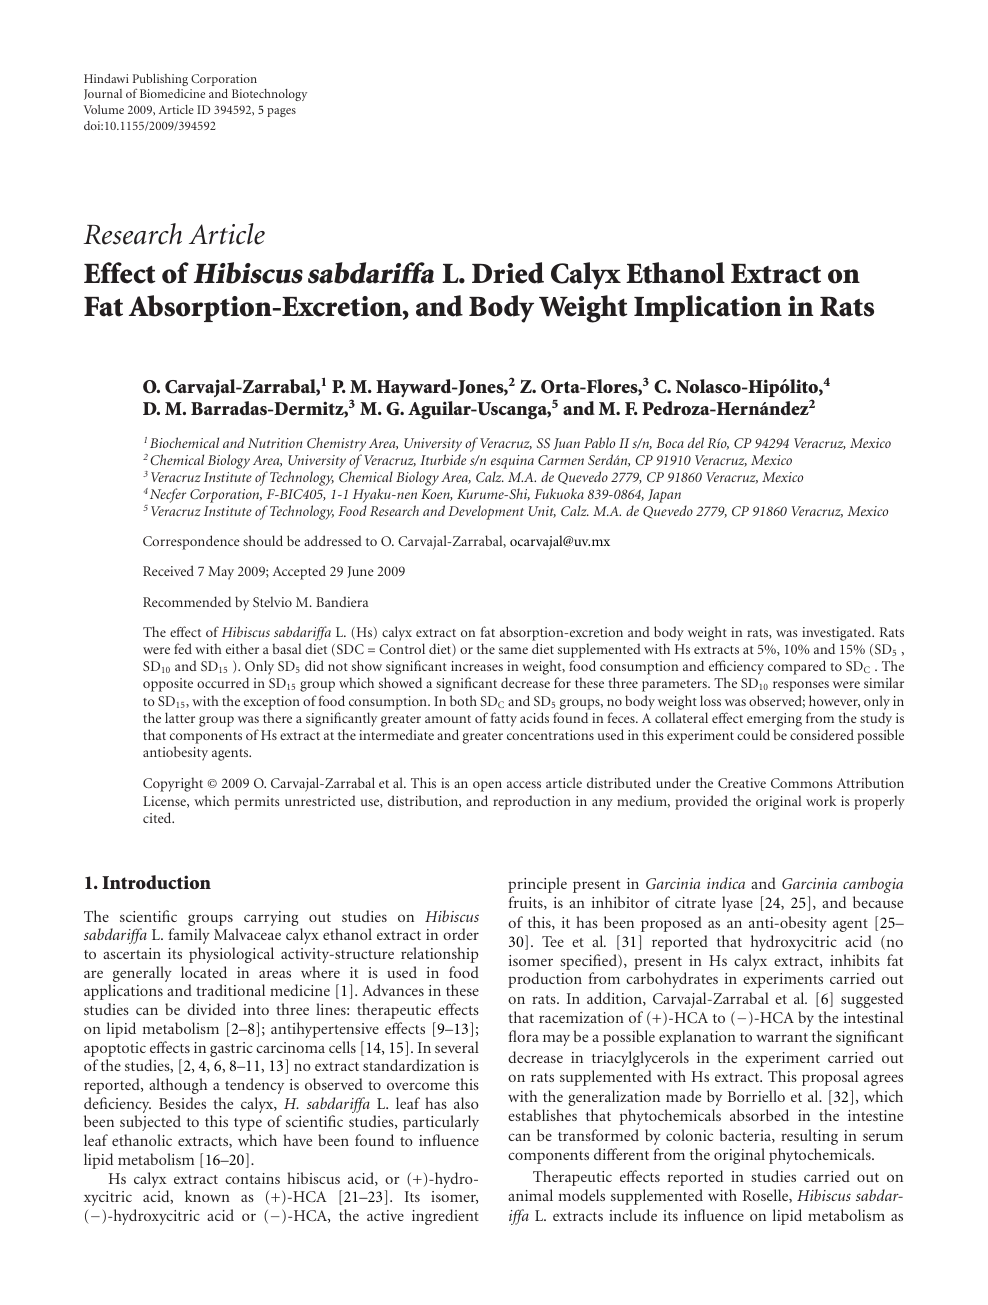 Effect Of Hibiscus Sabdariffa L Dried Calyx Ethanol Extract On Fat Absorption Excretion And Body Weight Implication In Rats Topic Of Research Paper In Biological Sciences Download Scholarly Article Pdf And Read